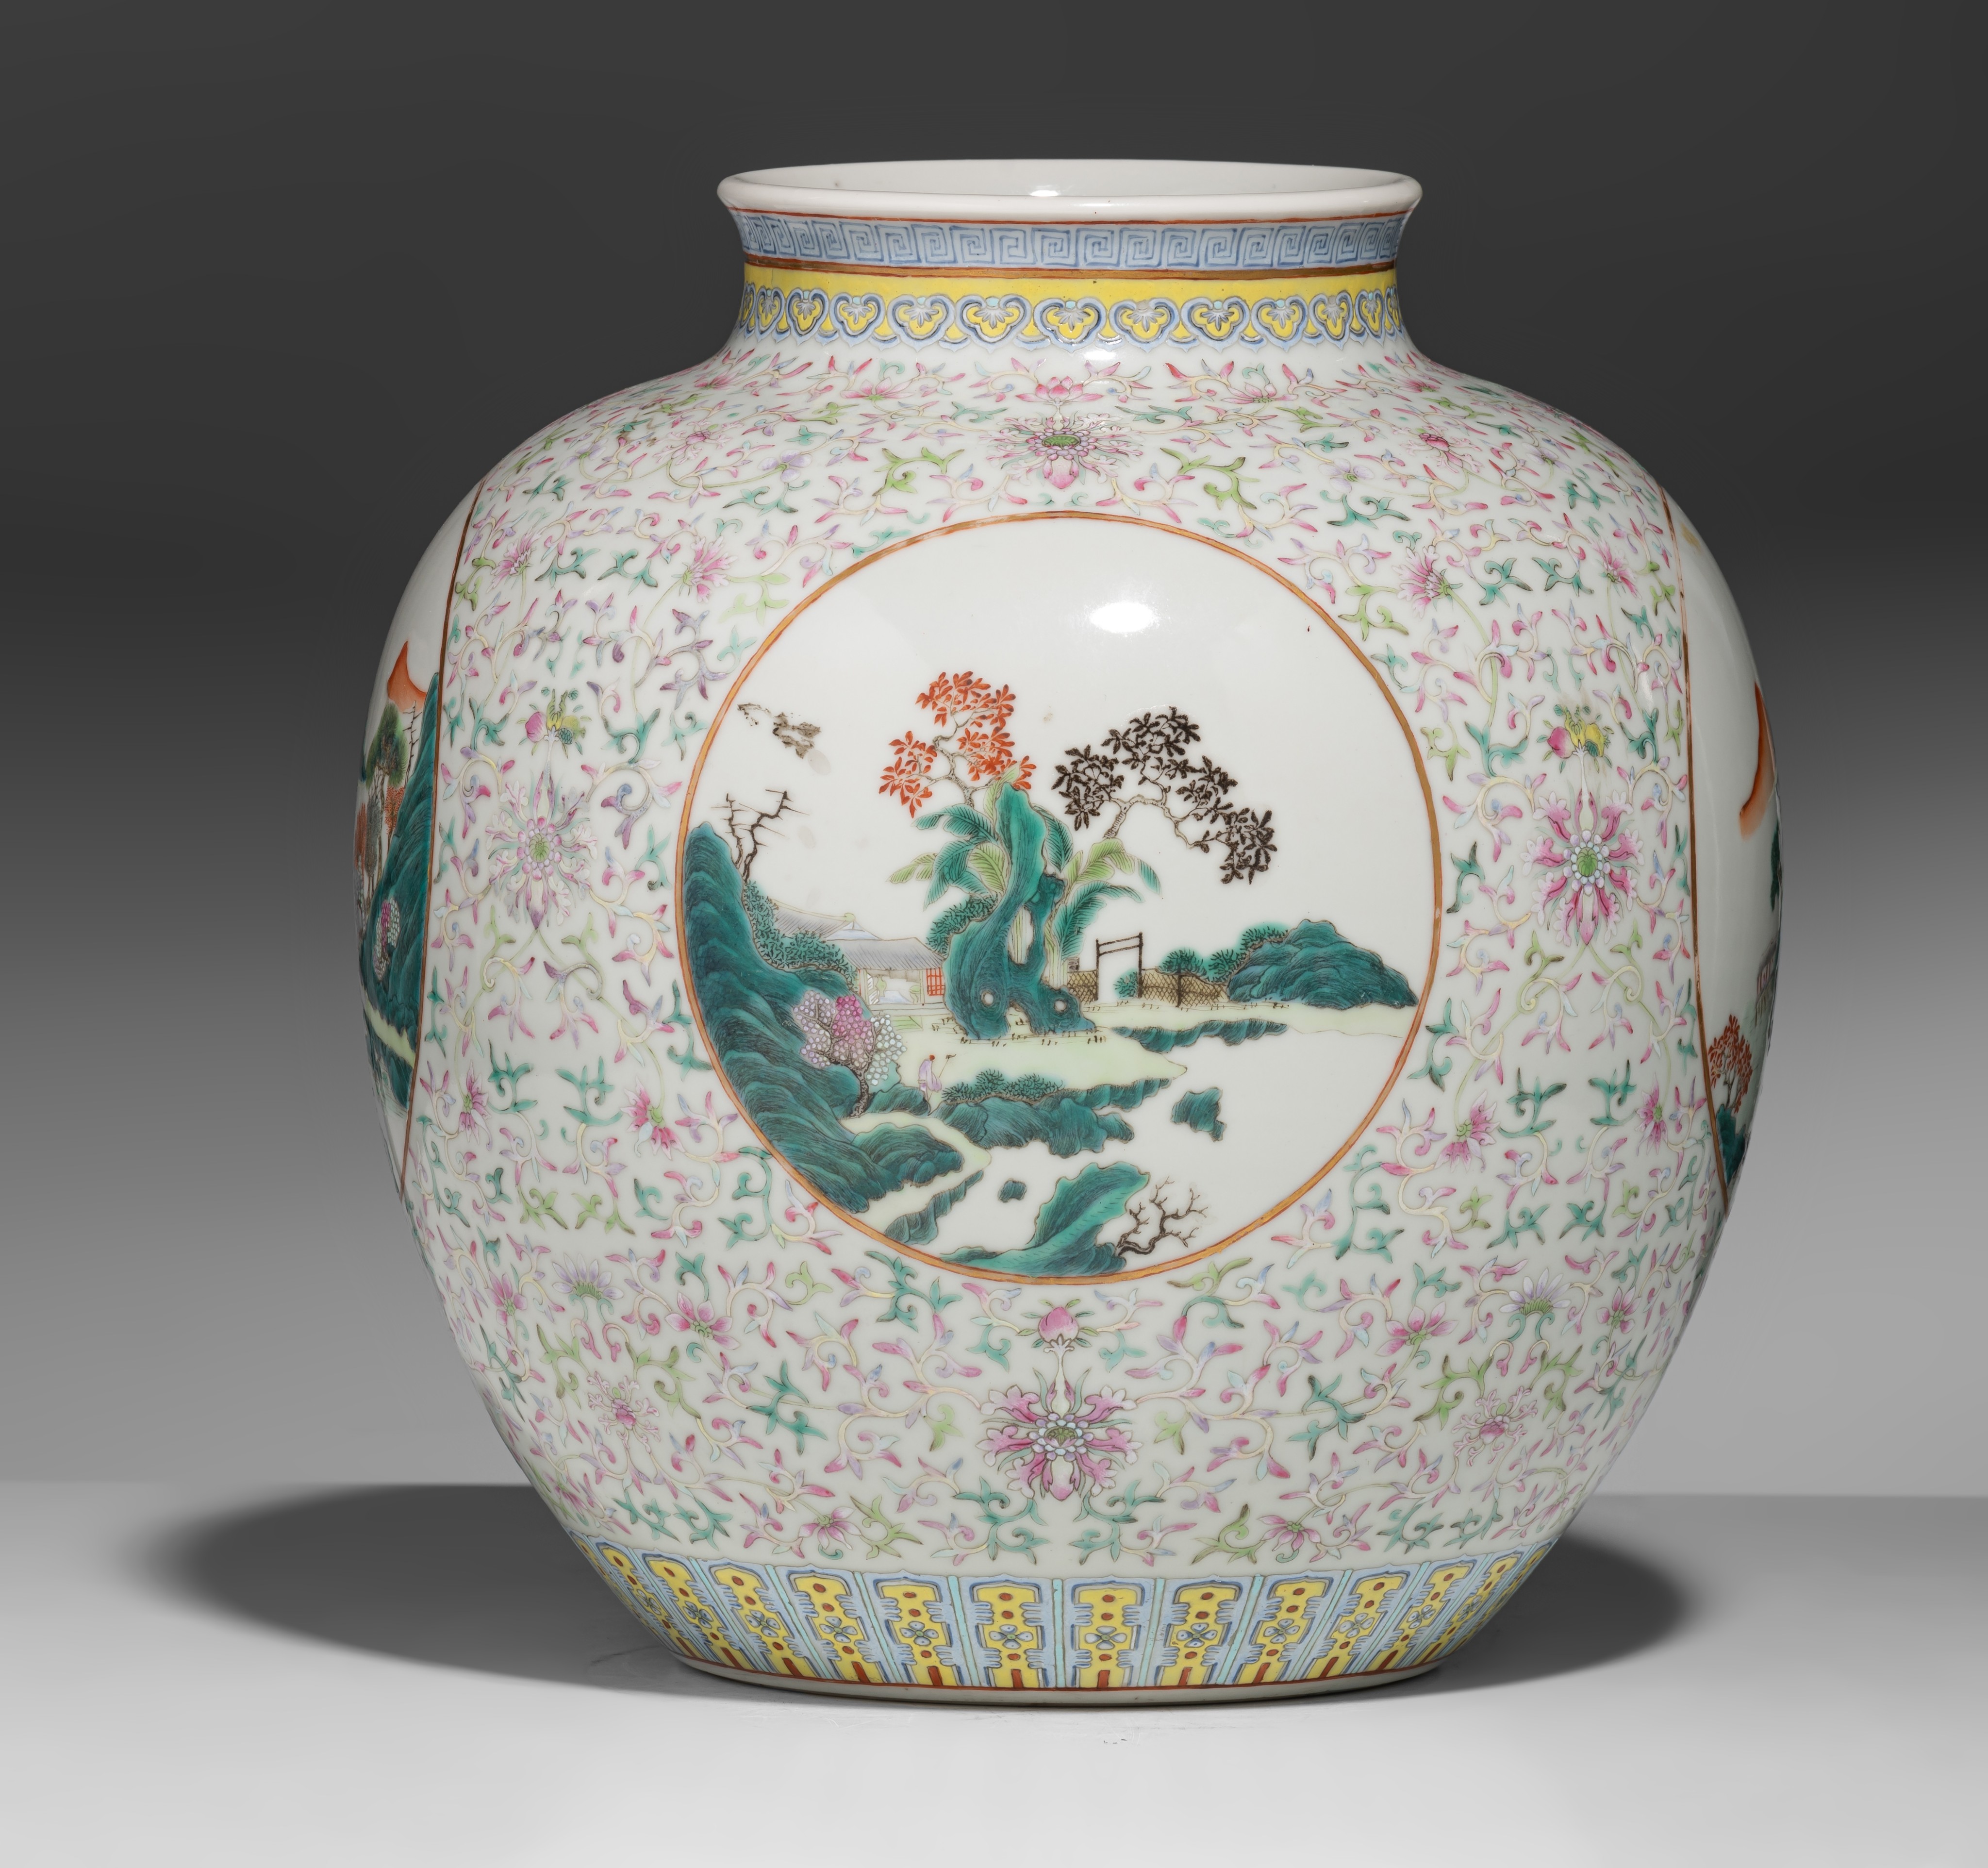 A Chinese famille rose 'Lotus scroll' zun vase, with a Qianlong mark, 19thC, H 25 - ø 23 cm - Image 5 of 8